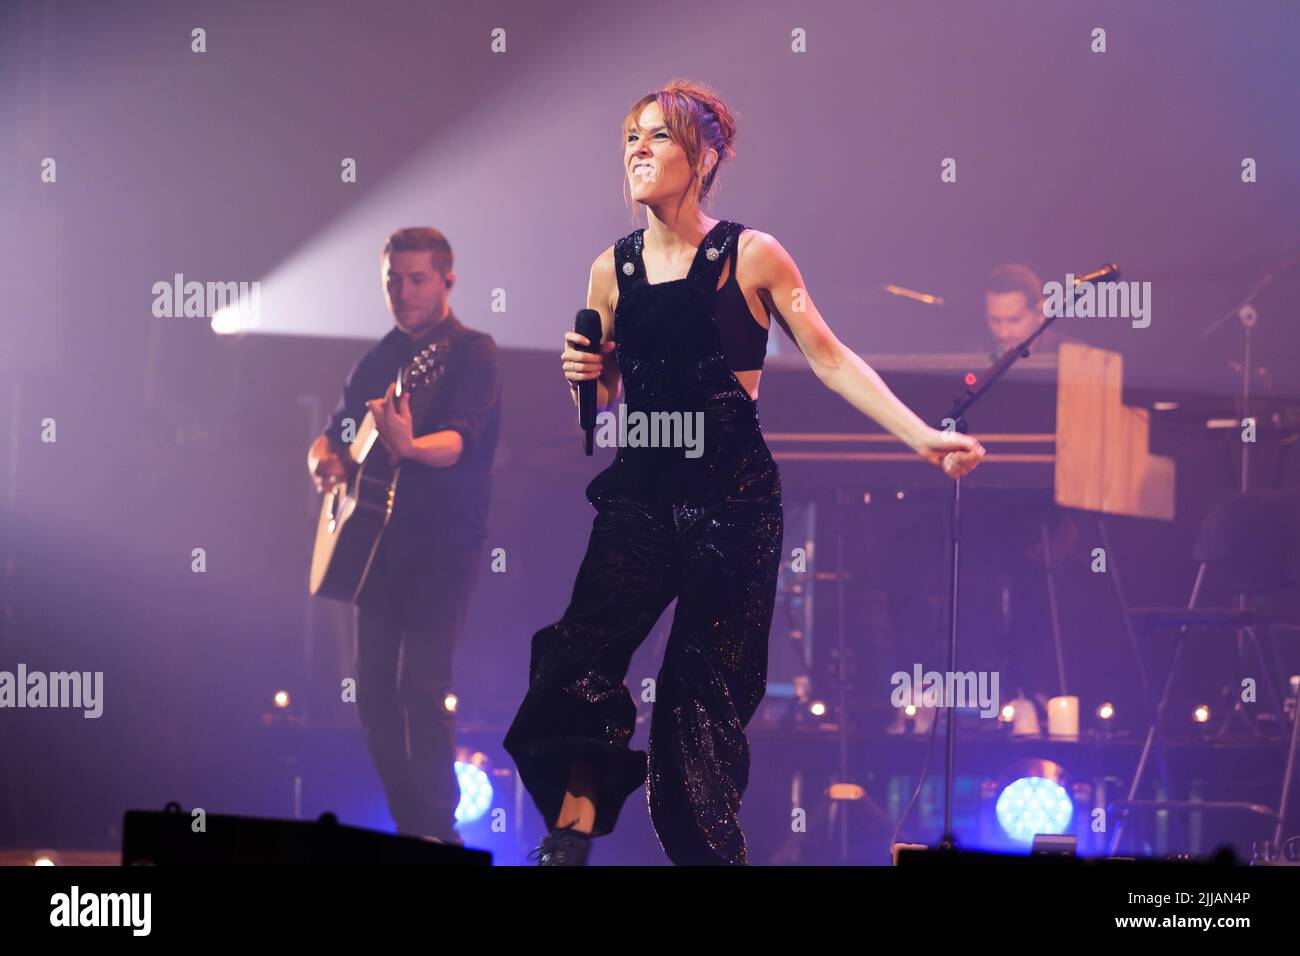 Madrid, Spain. 24th July, 2022. The French singer-songwriter Isabelle Geffroy, known by her stage name Zaz, performs during the concert at the Teatro Real in Madrid where she has shown her fusion of French song with gypsy jazz, within the tour "Organique Tour" in Madrid. (Photo by Atilano Garcia/SOPA Images/Sipa USA) Credit: Sipa USA/Alamy Live News Stock Photo